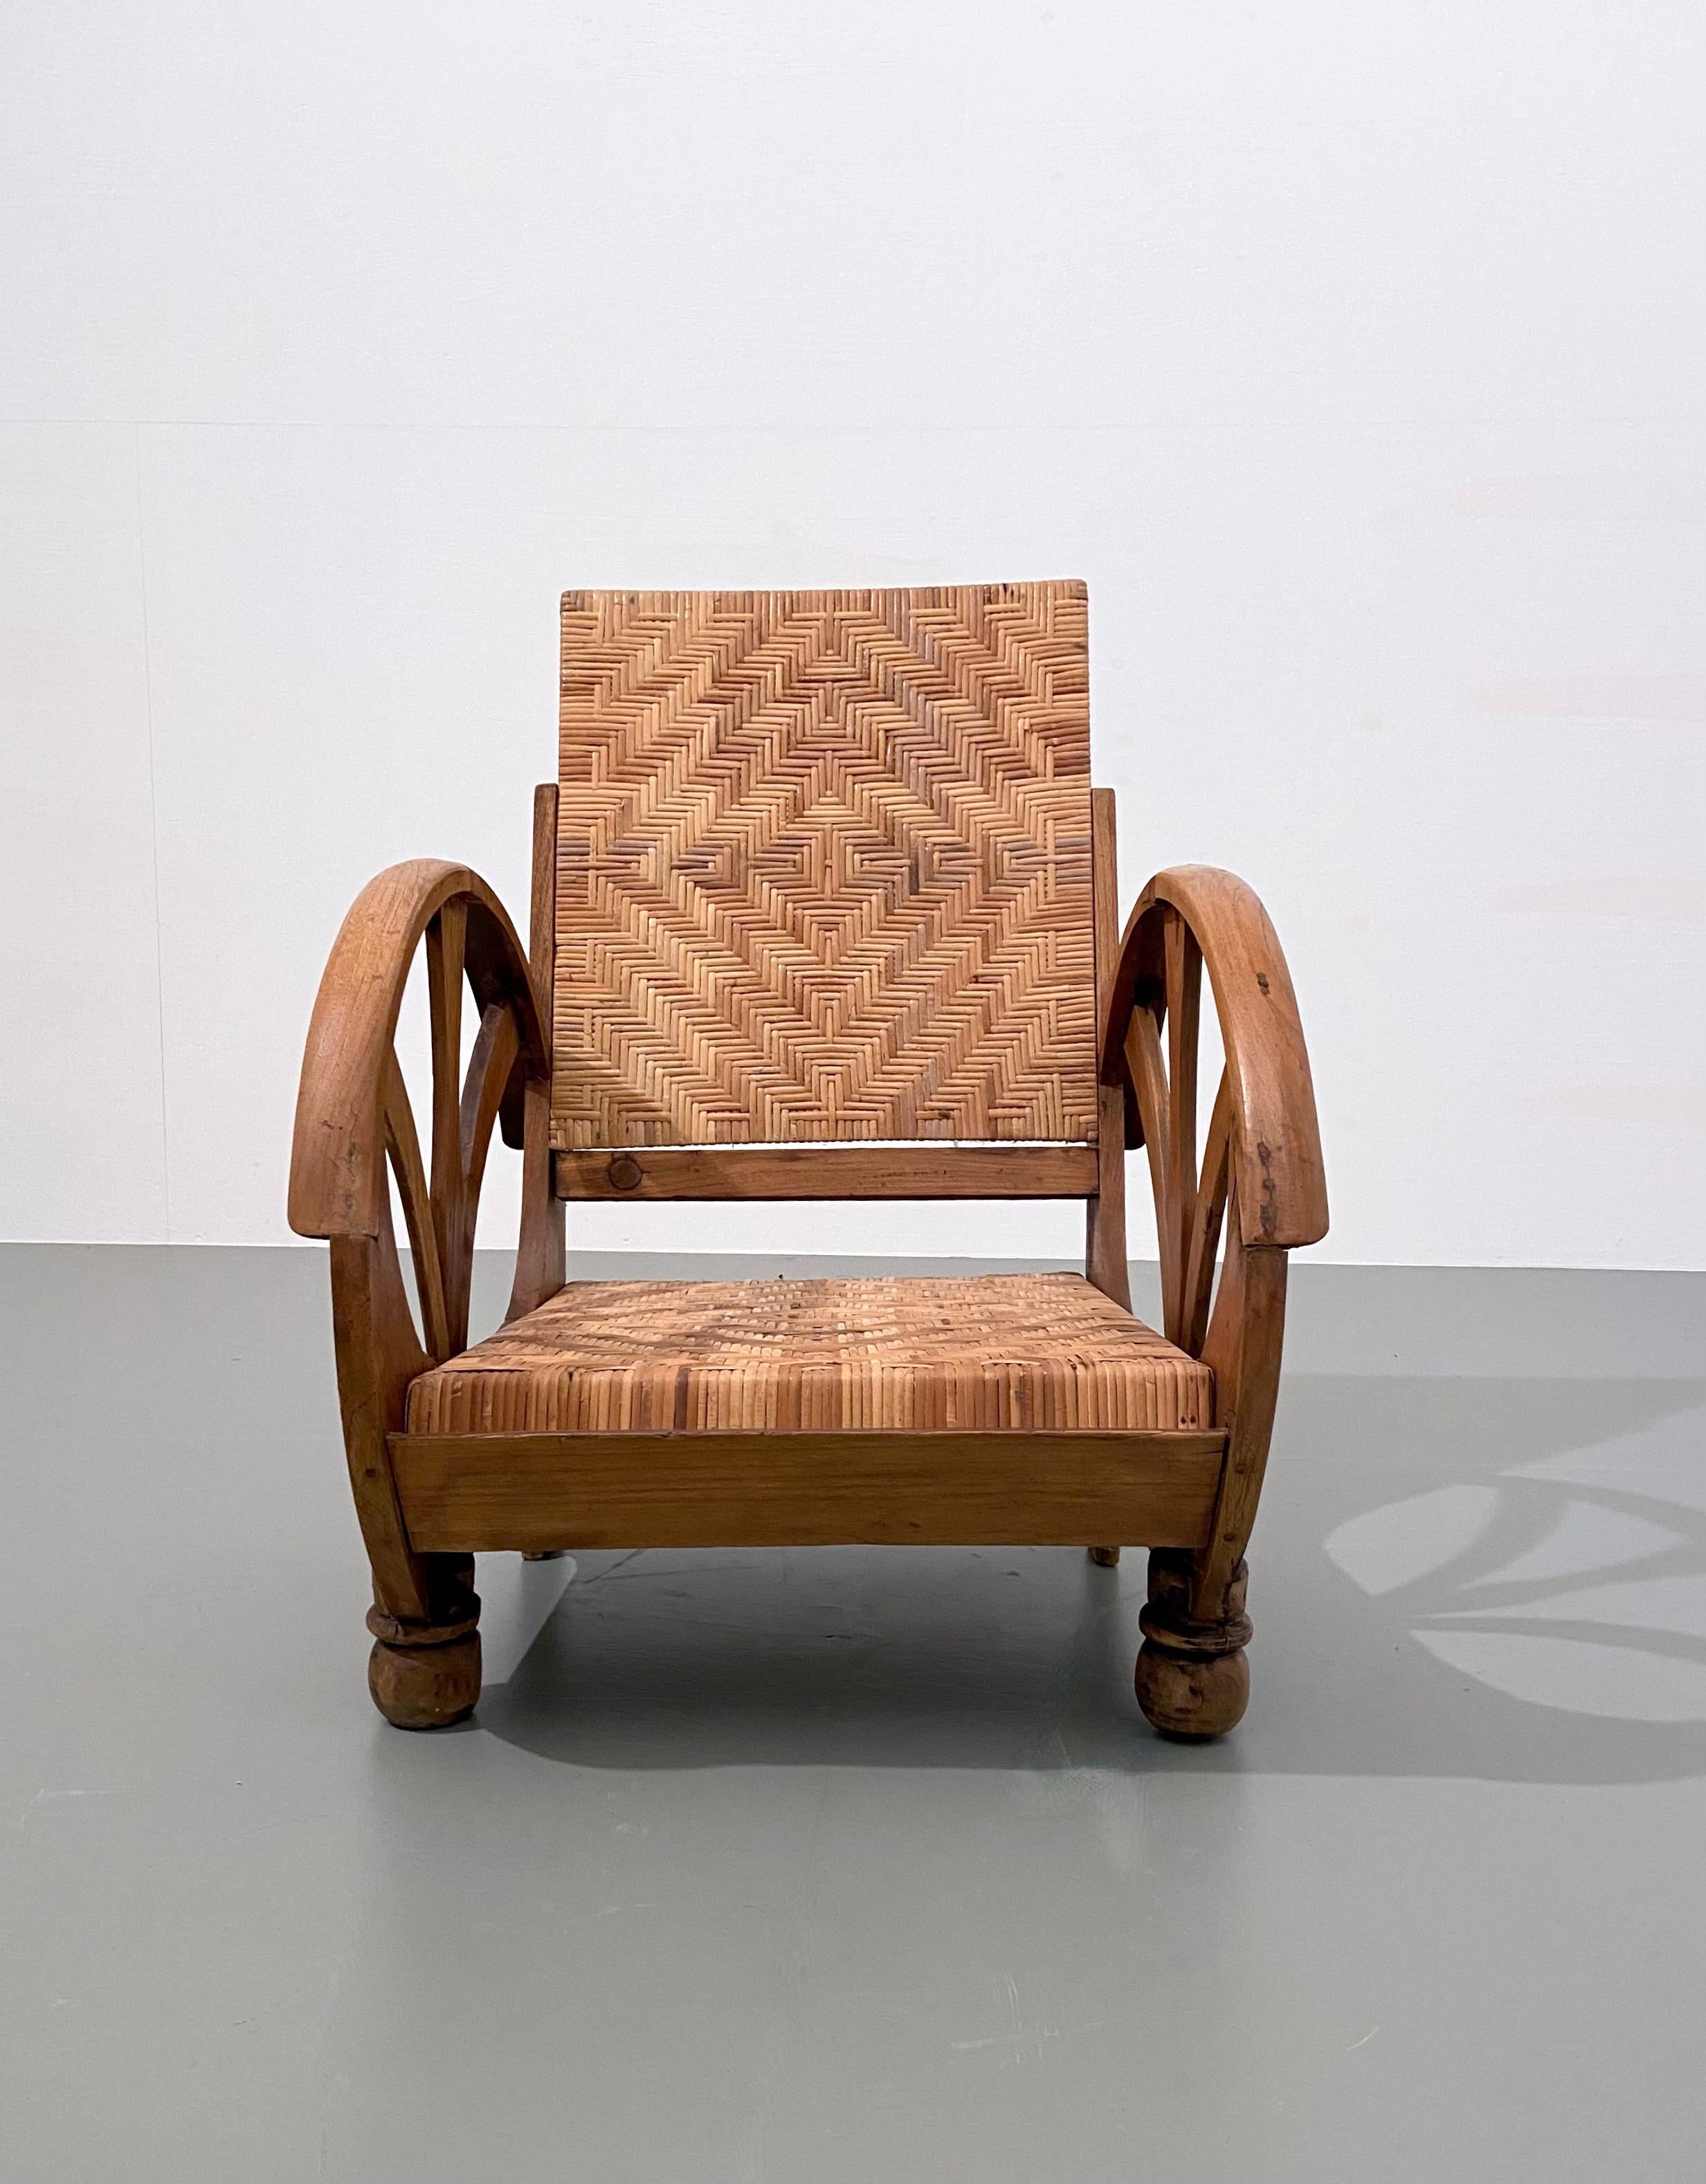 Italian Art Deco Armchair in Wood and Cane, Italy, 1930s